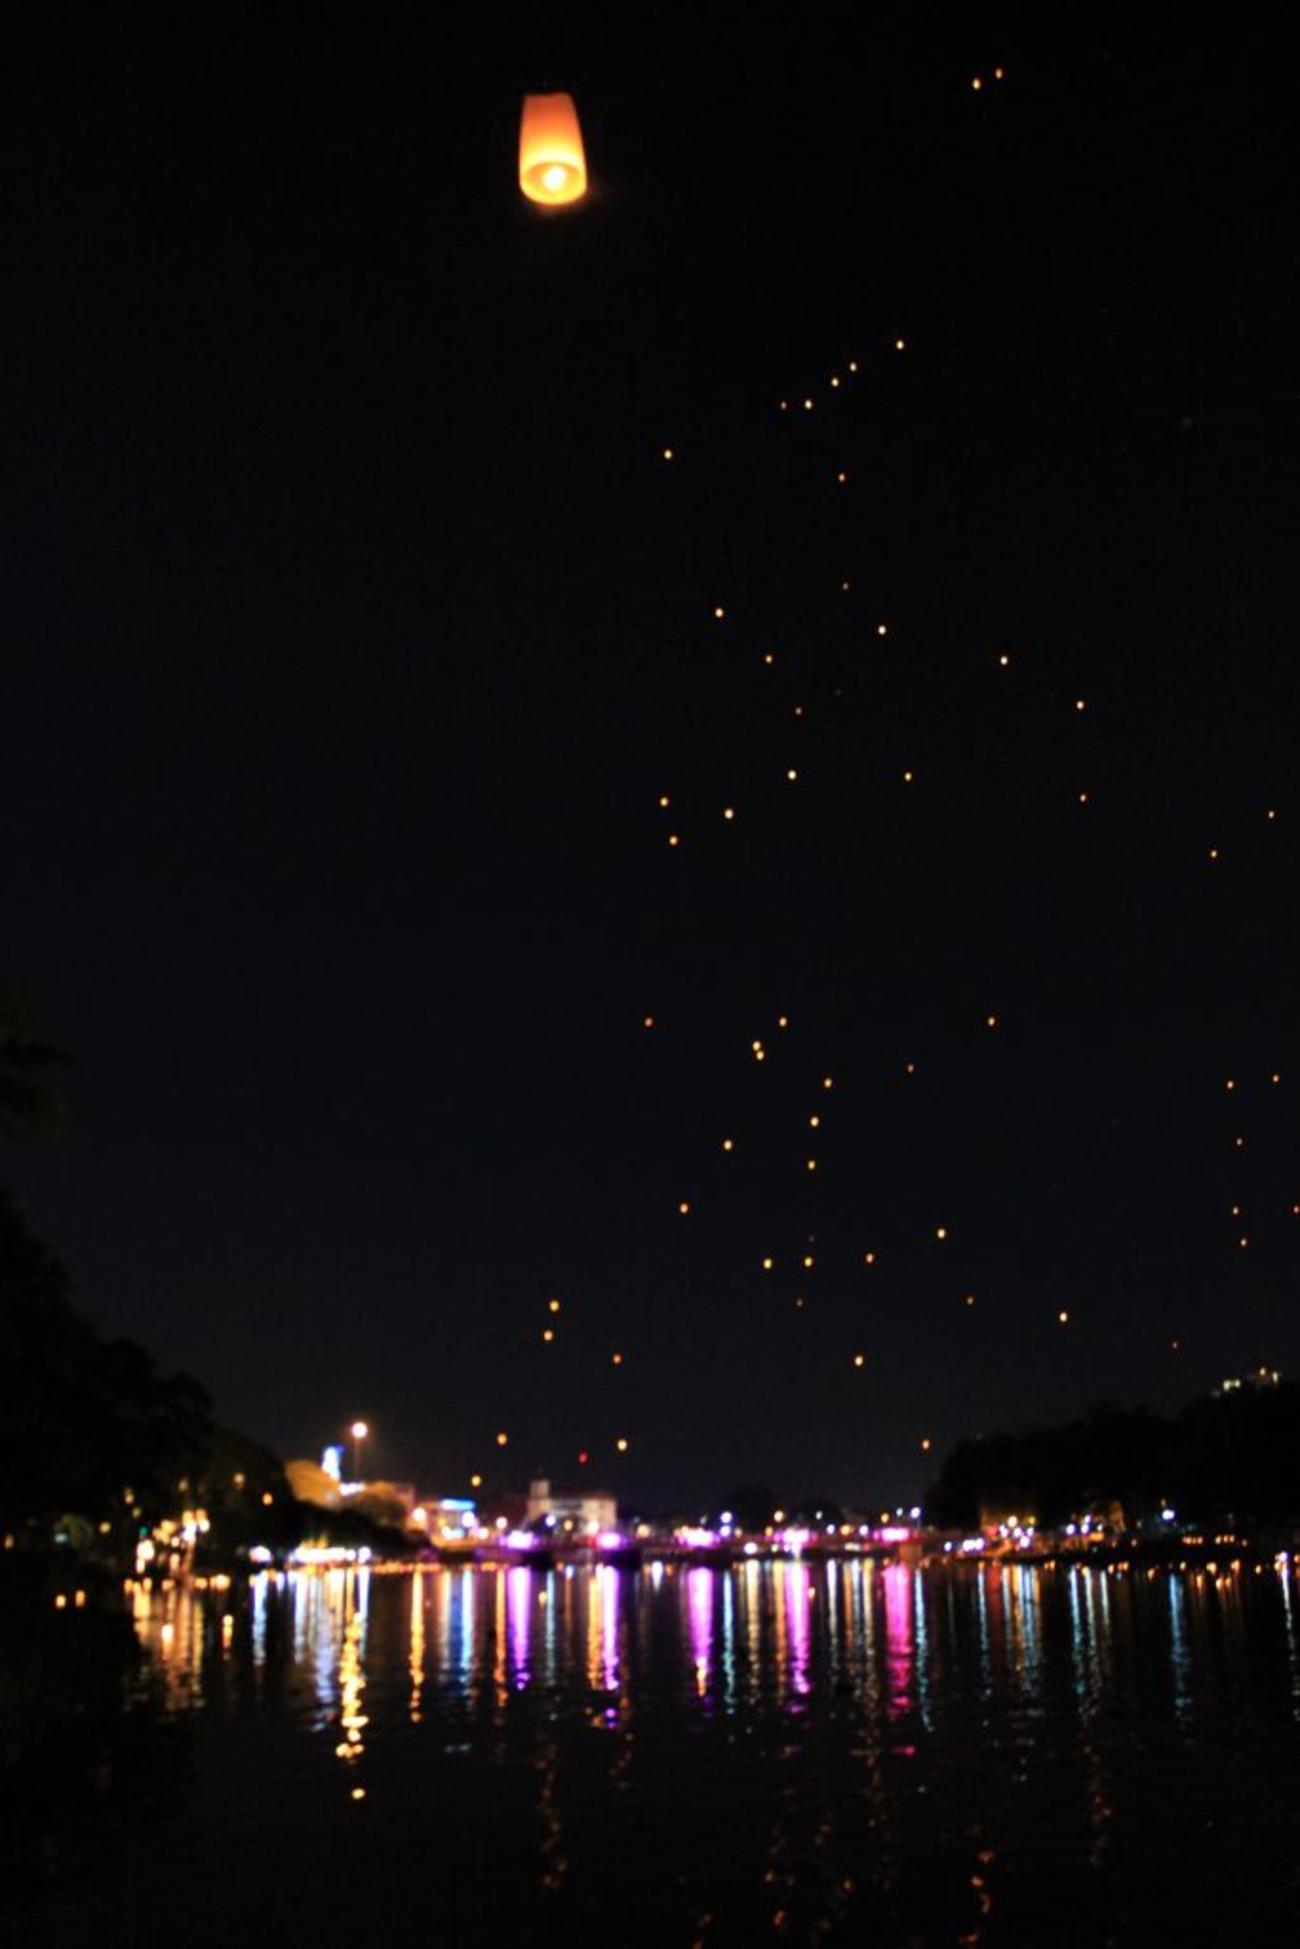 Inside the city of Chiang Mai, lanterns are released one or two at a time